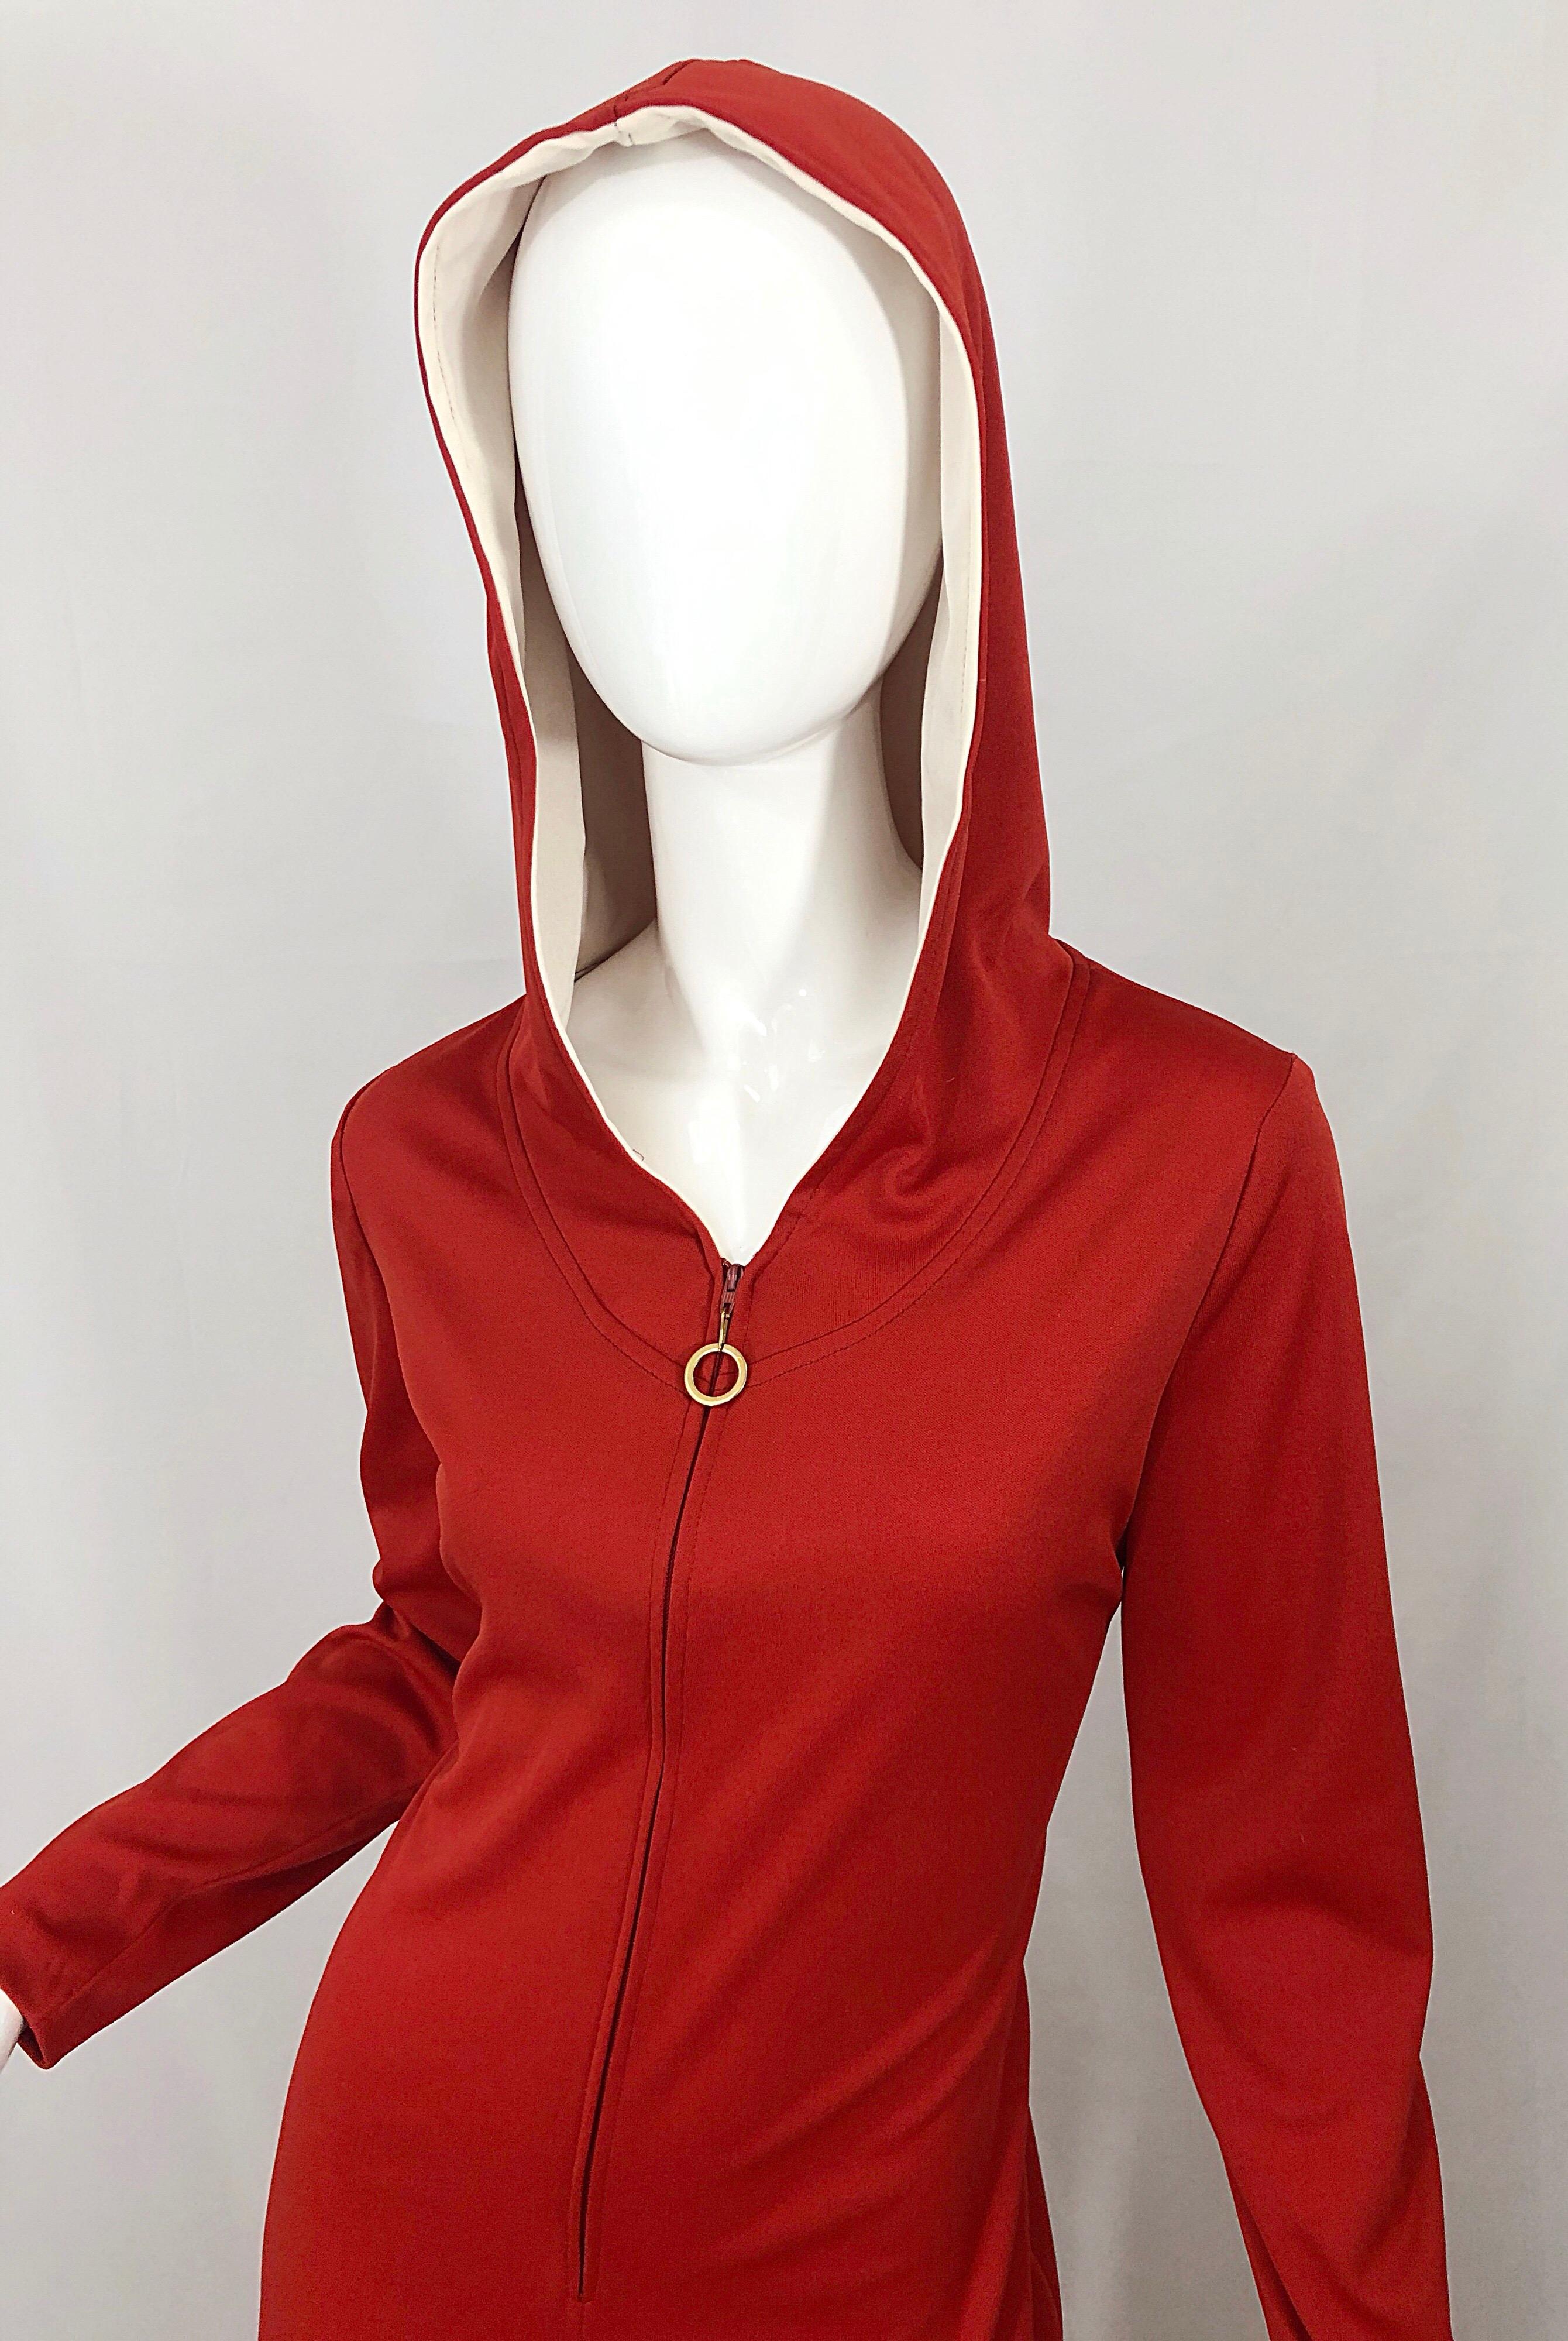 Awesome mid 1970s burnt orange wide leg hooded jumpsuit! Features a hidden zipper up the front with a doorknob pull. Soft stretch jersey fabric can accomodate an array of sizes. Great belted or alone with wedges, sandals, boots or heels. 
In great